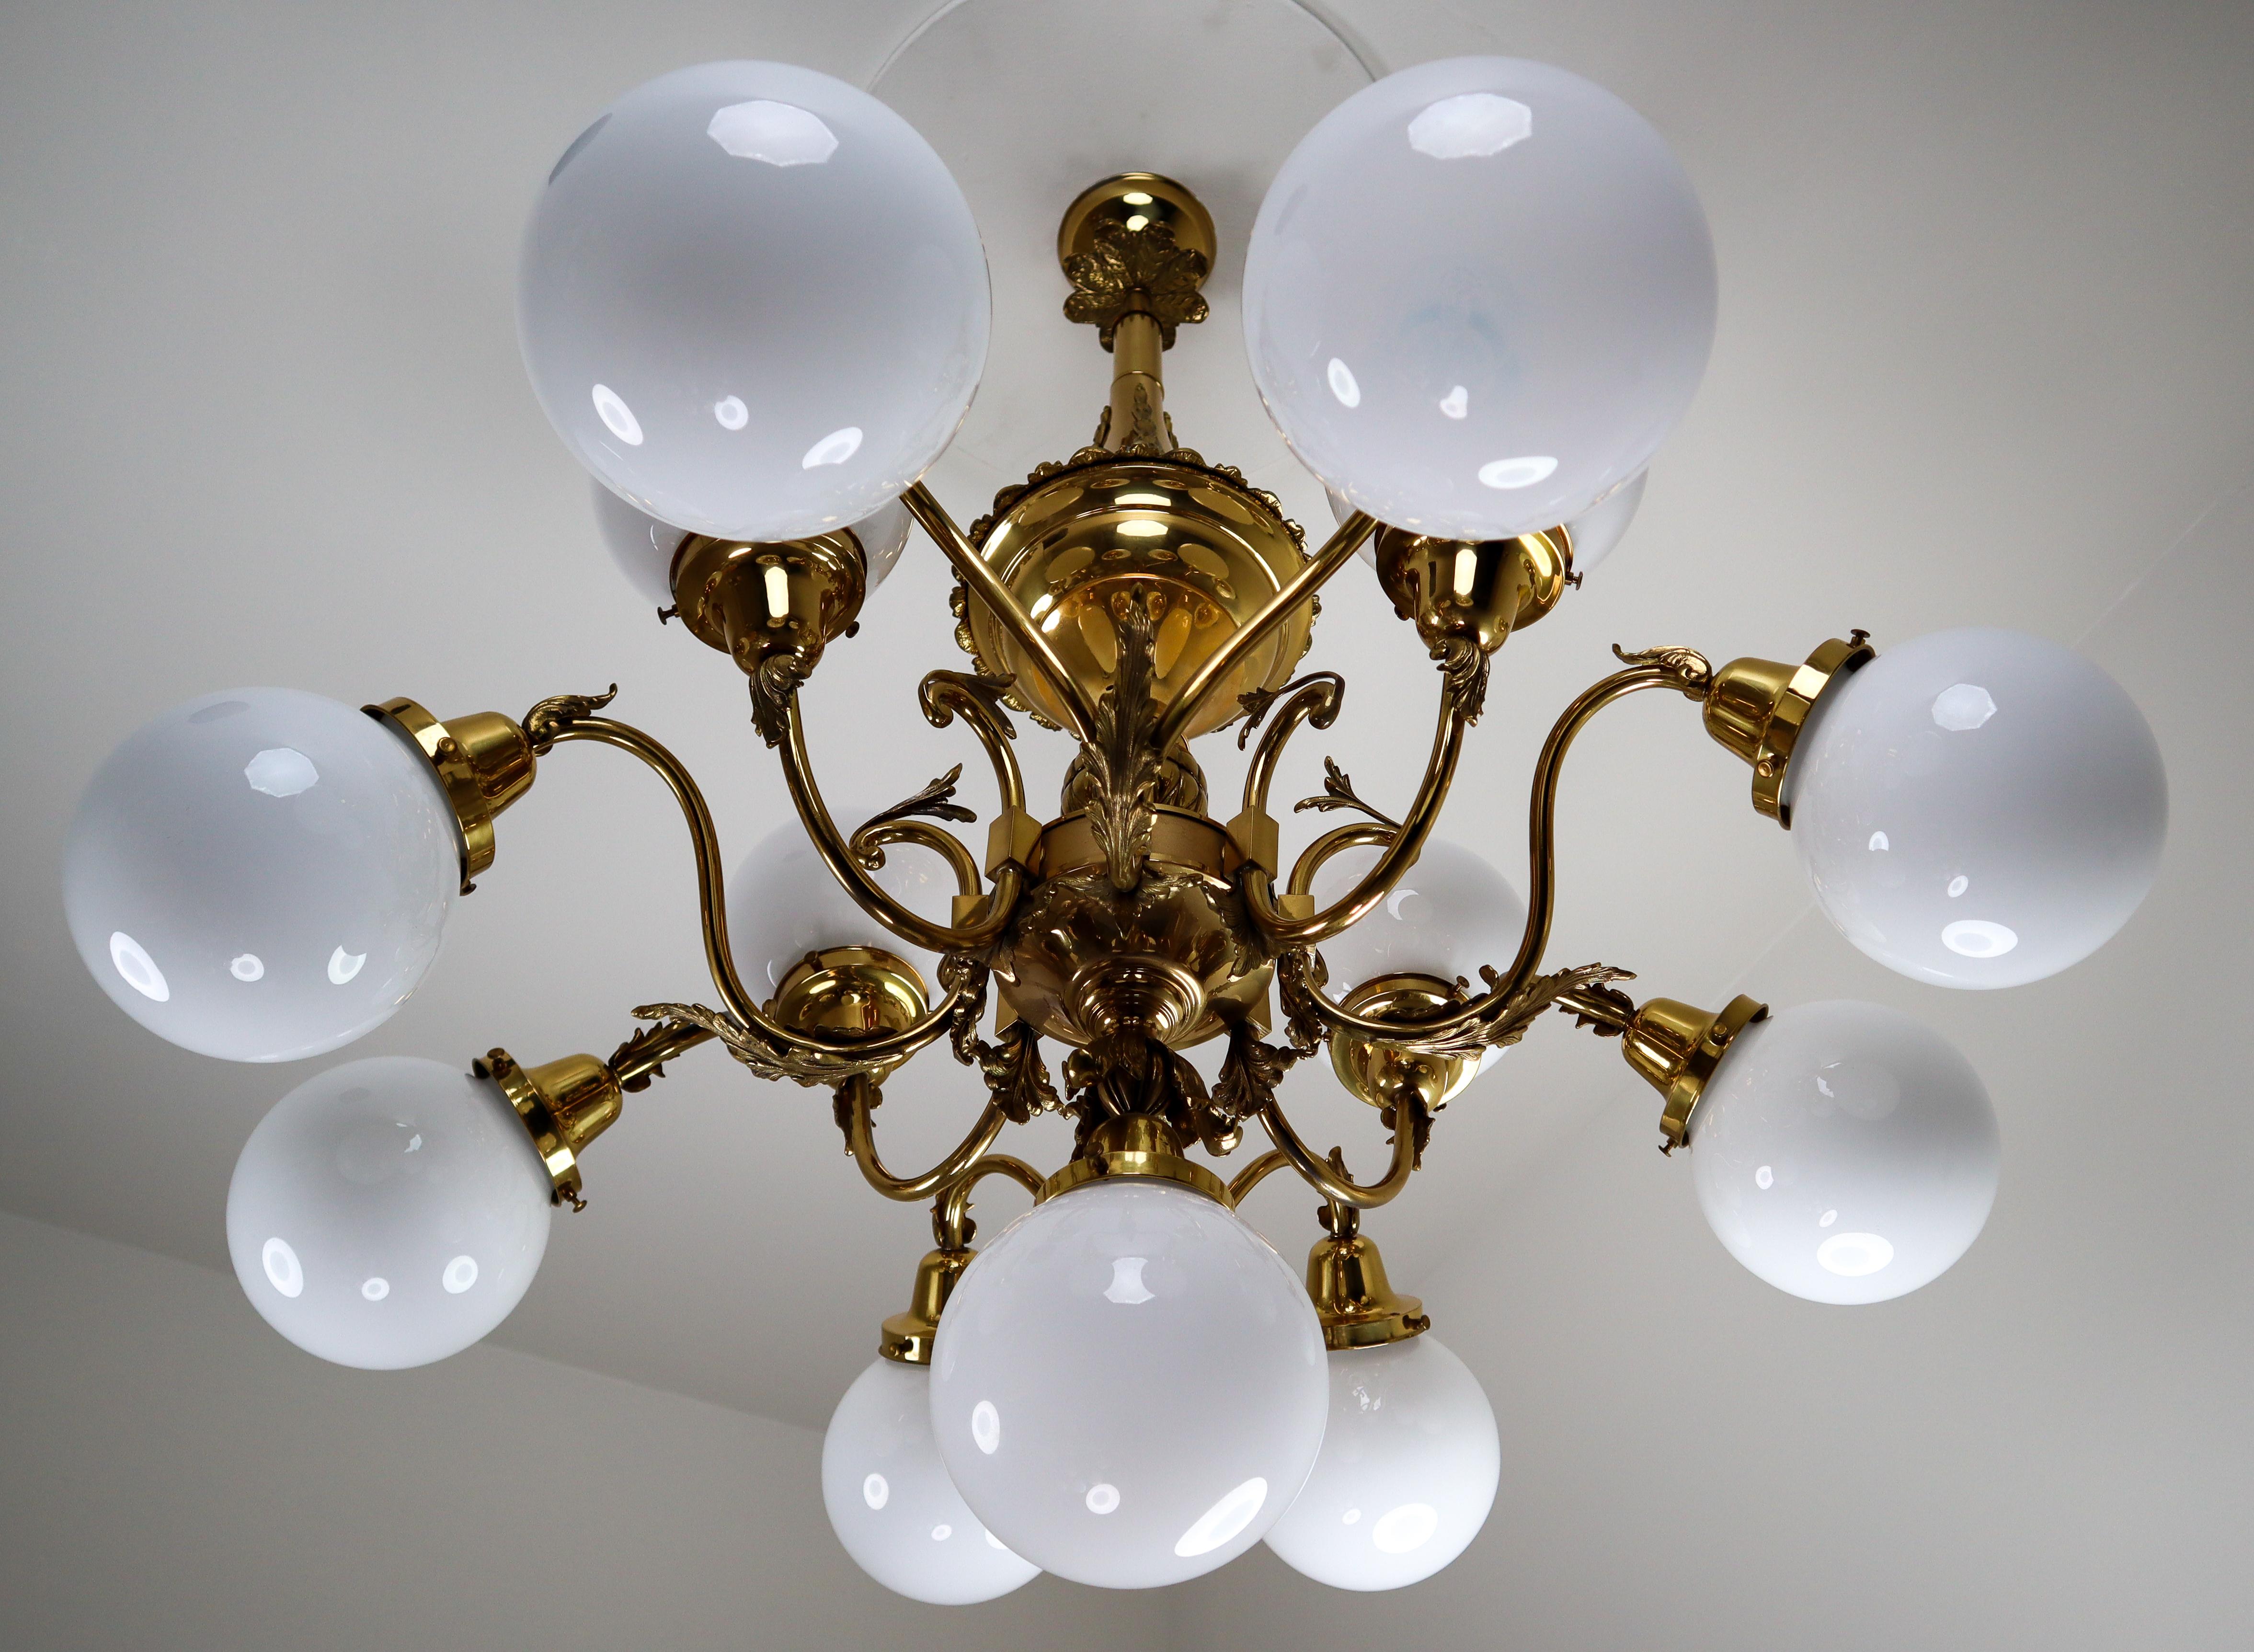 Monumental Brass Chandeliers with Opaline Glass Globes, National Gallery Praque 1